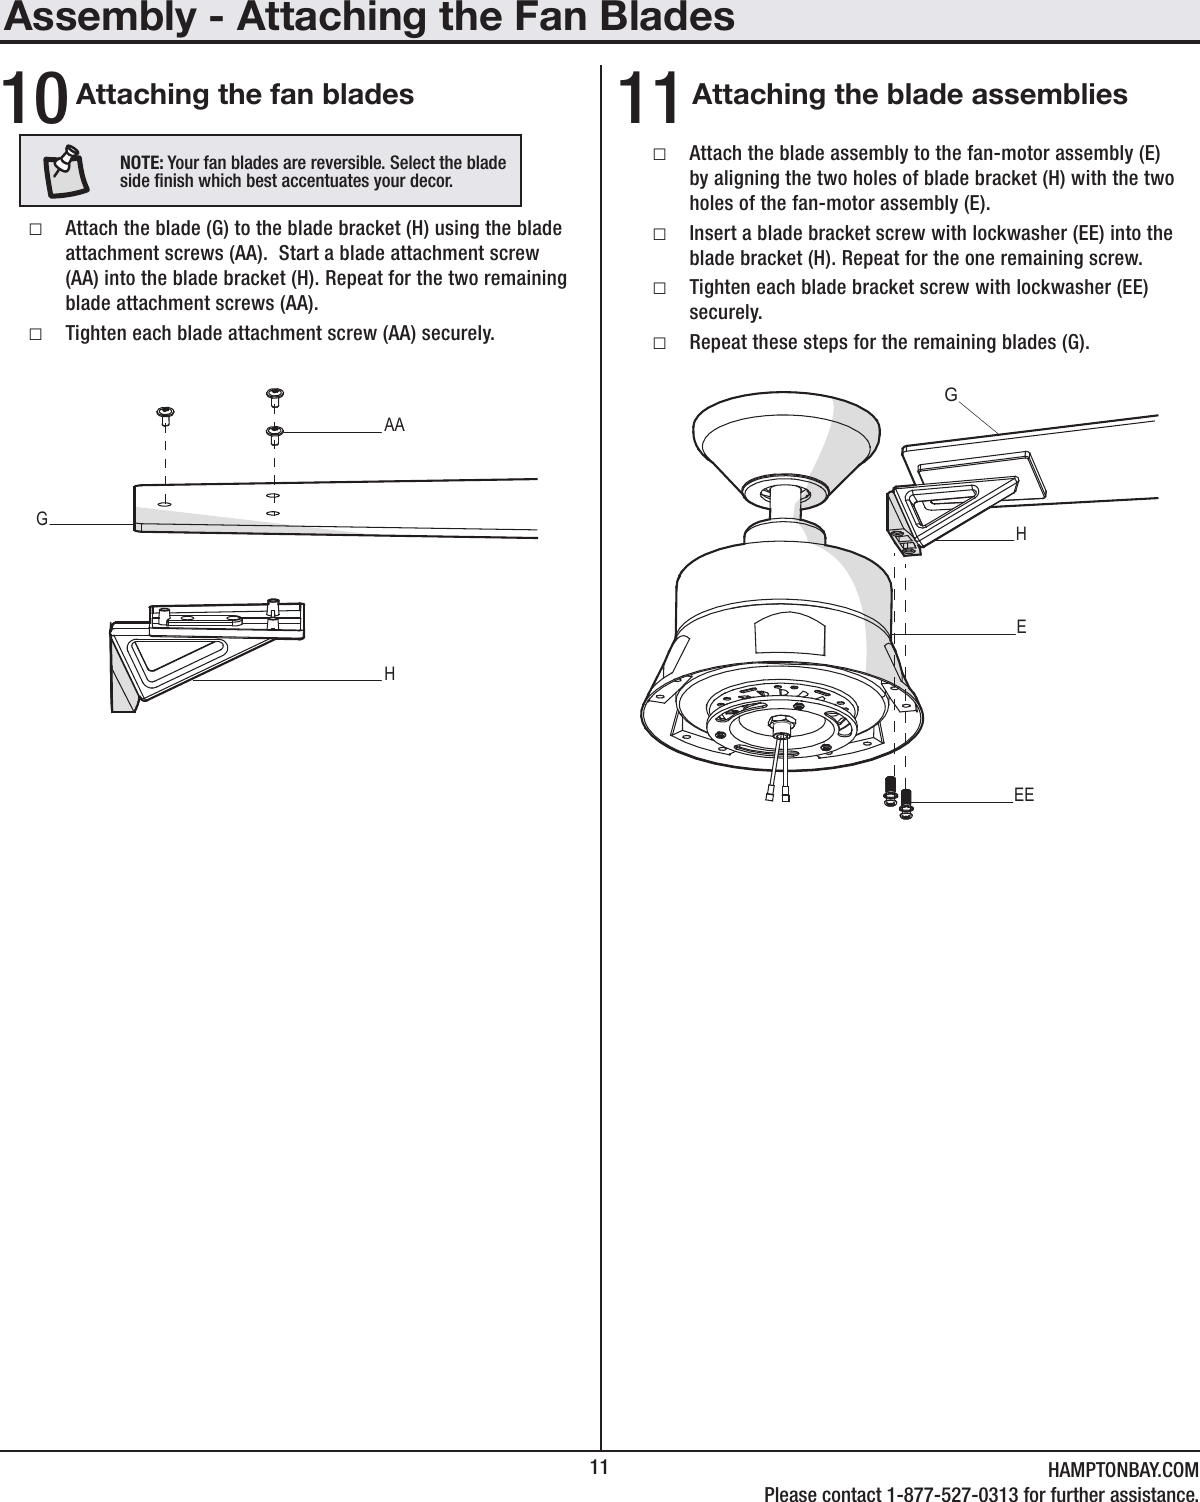 11 HAMPTONBAY.COMPlease contact 1-877-527-0313 for further assistance.Assembly - Attaching the Fan BladesAttaching the fan blades Attaching the blade assemblies10 11 □Attach the blade (G) to the blade bracket (H) using the blade attachment screws (AA).  Start a blade attachment screw (AA) into the blade bracket (H). Repeat for the two remaining blade attachment screws (AA). □Tighten each blade attachment screw (AA) securely. □Attach the blade assembly to the fan-motor assembly (E) by aligning the two holes of blade bracket (H) with the two holes of the fan-motor assembly (E). □Insert a blade bracket screw with lockwasher (EE) into the blade bracket (H). Repeat for the one remaining screw. □Tighten each blade bracket screw with lockwasher (EE) securely. □Repeat these steps for the remaining blades (G).AAGHHGEEENOTE: Your fan blades are reversible. Select the blade side nish which best accentuates your decor.